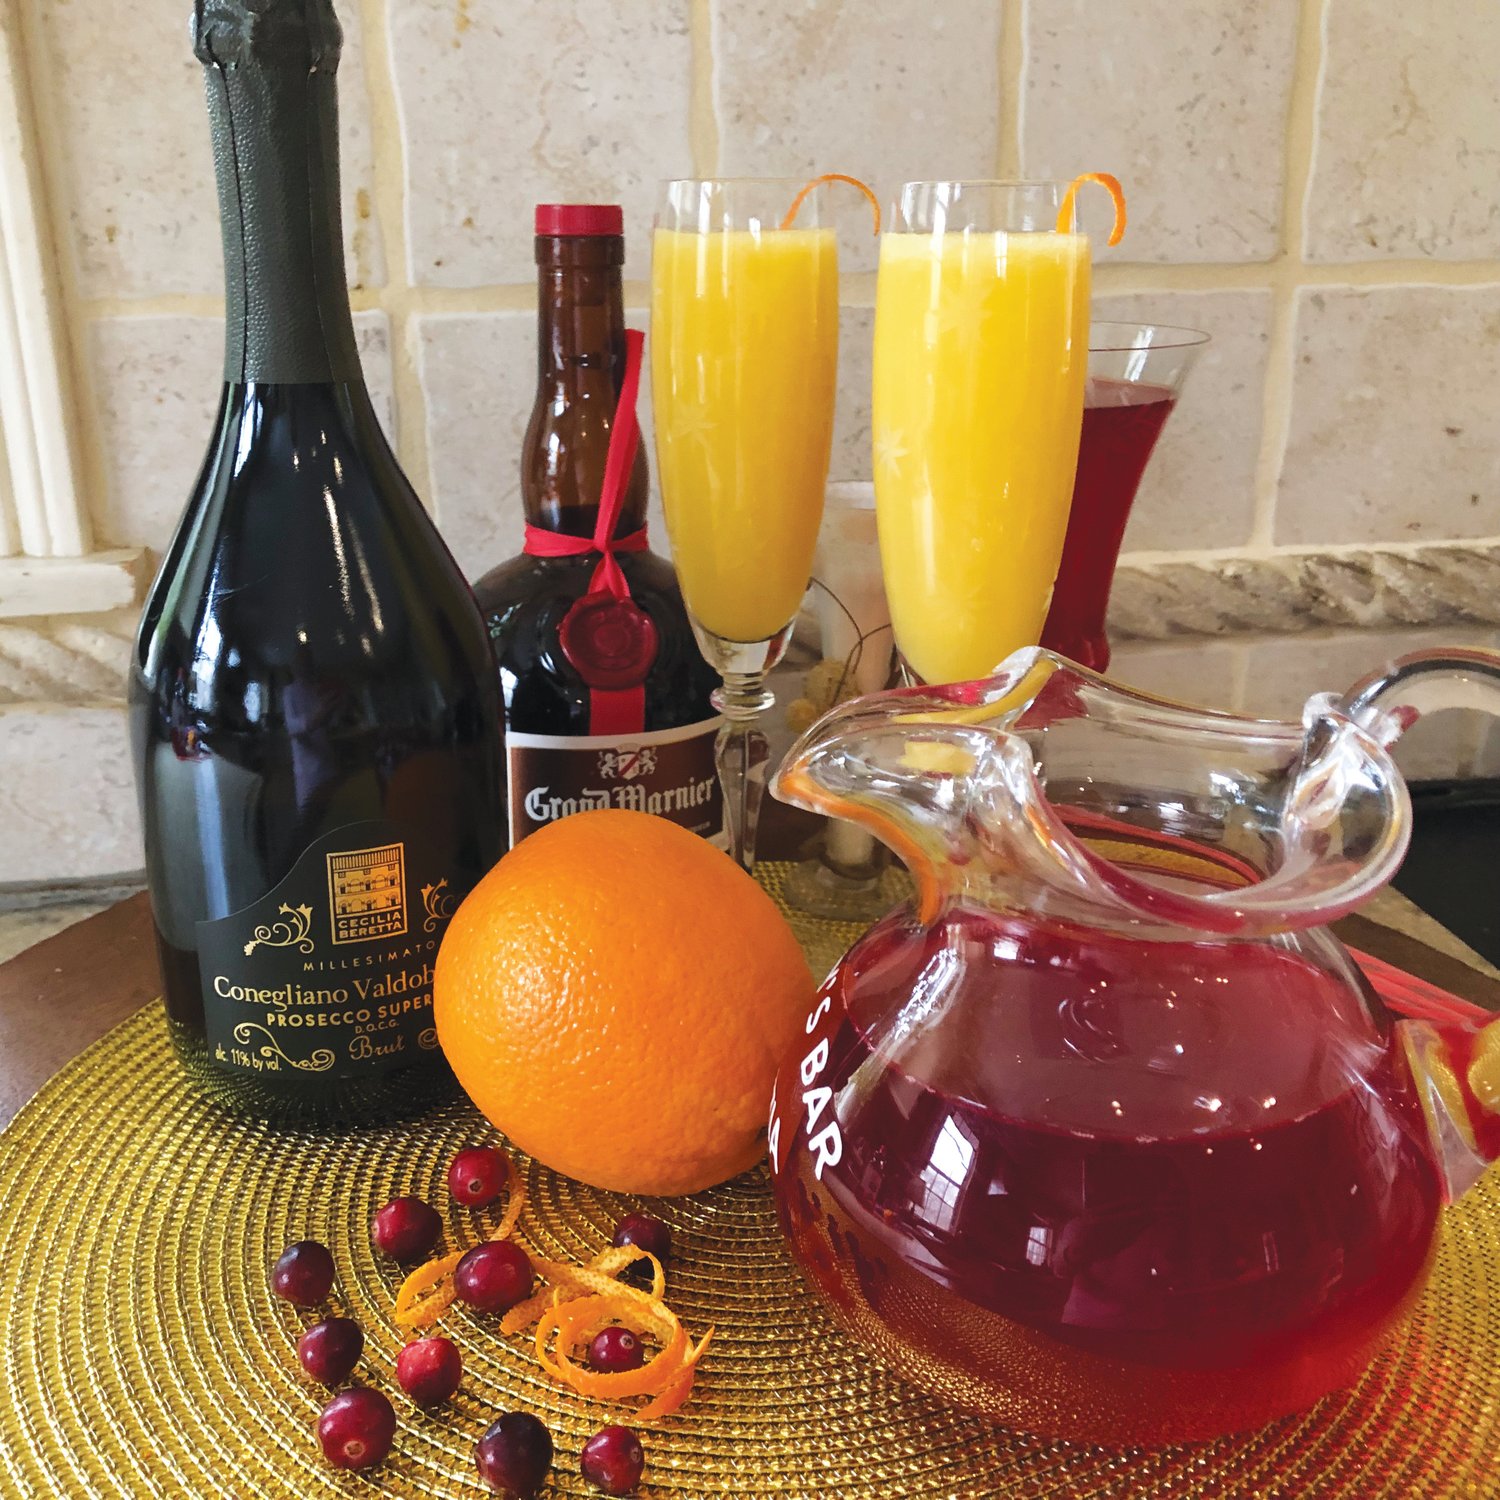 To make your mimosas even more memorable, add cranberry juice and enhance the orange component with fresh-squeezed juice and some Grand Marnier.